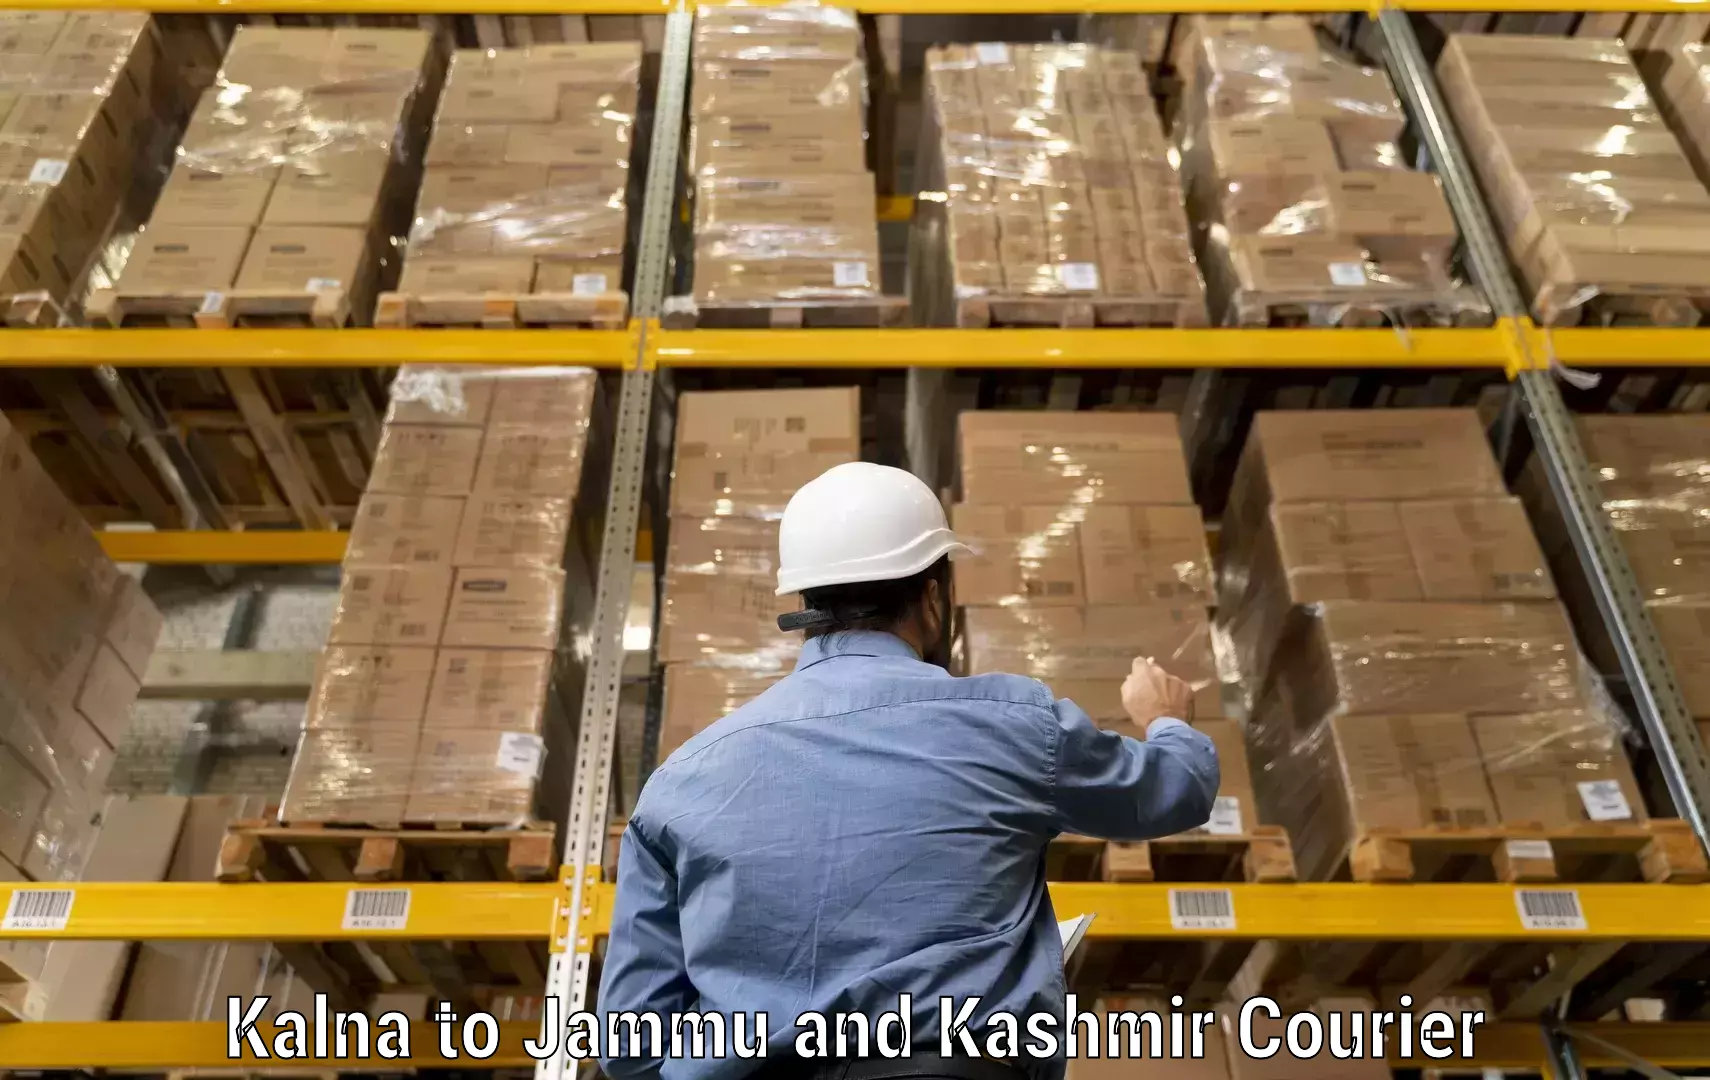 Professional courier services in Kalna to Jammu and Kashmir